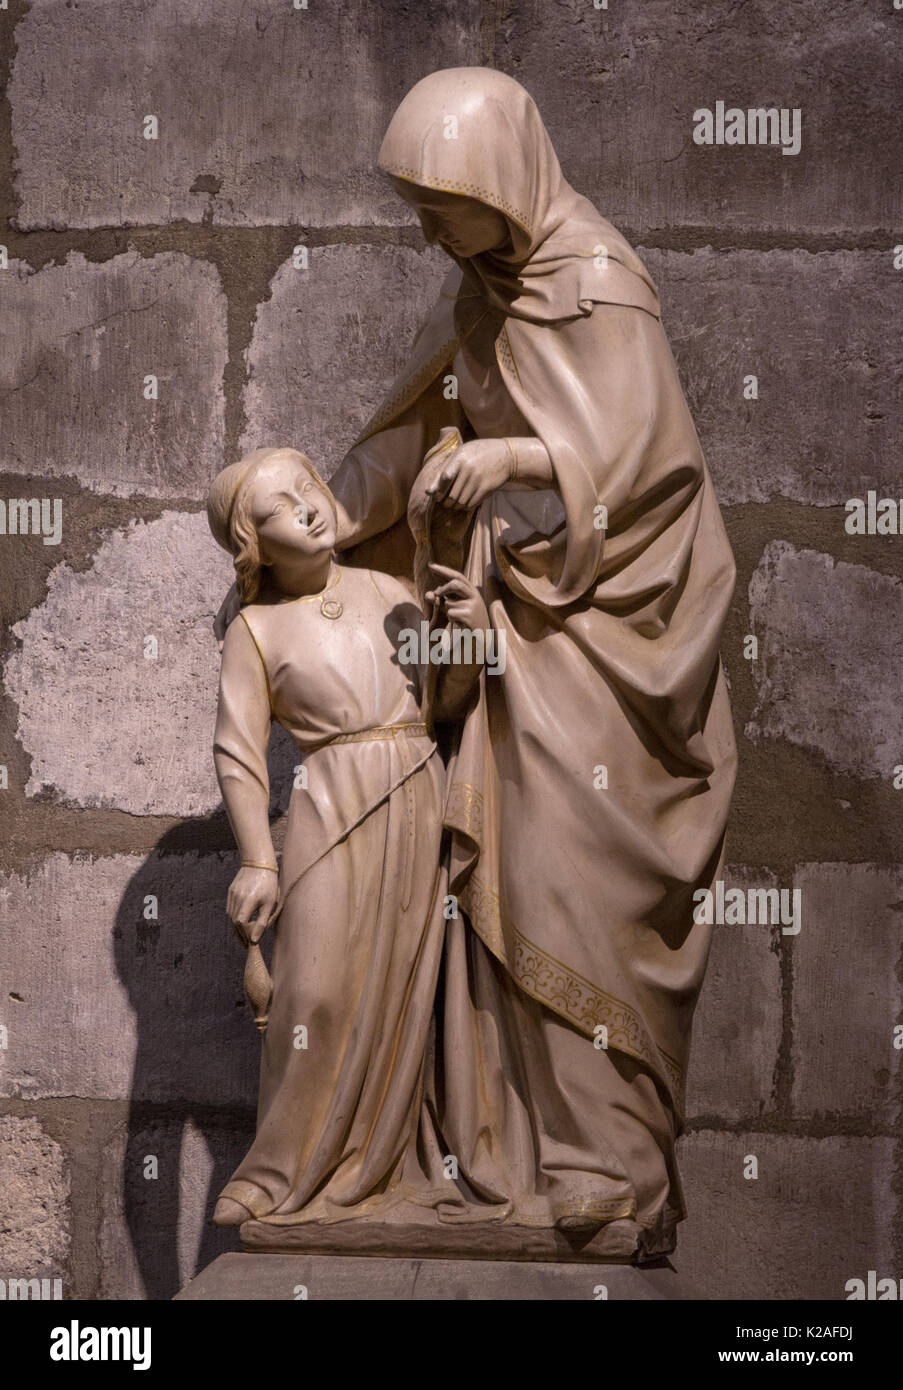 Historical landmark and touristic spot in Paris, France: Notre Dame cathedral interior detail - sculpture. Stock Photo